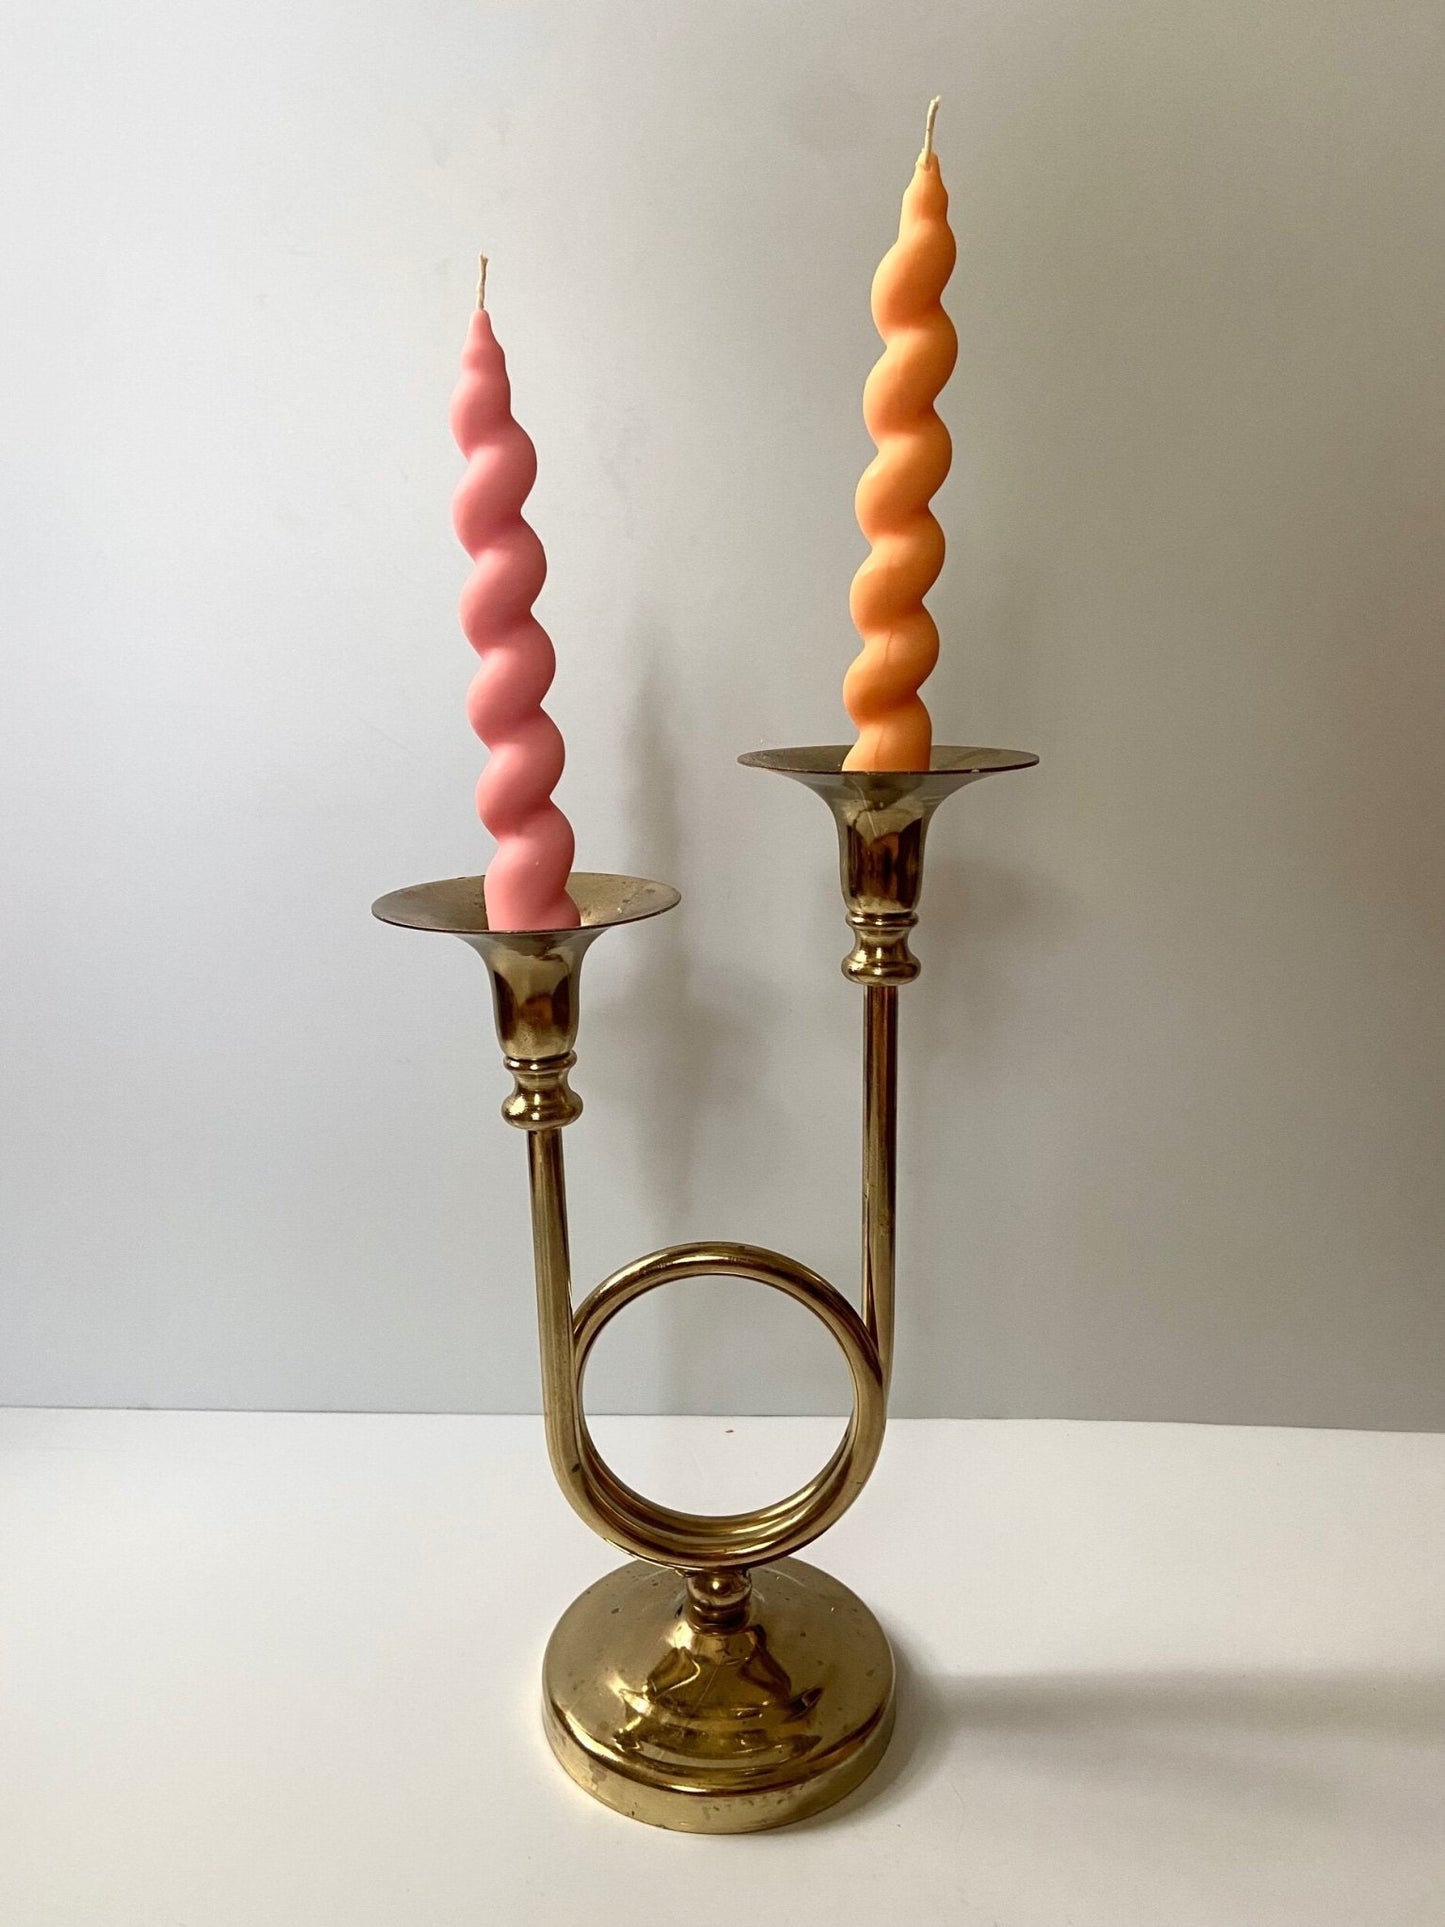 Twisty Taper Candle #2 - Kendall's Kandles